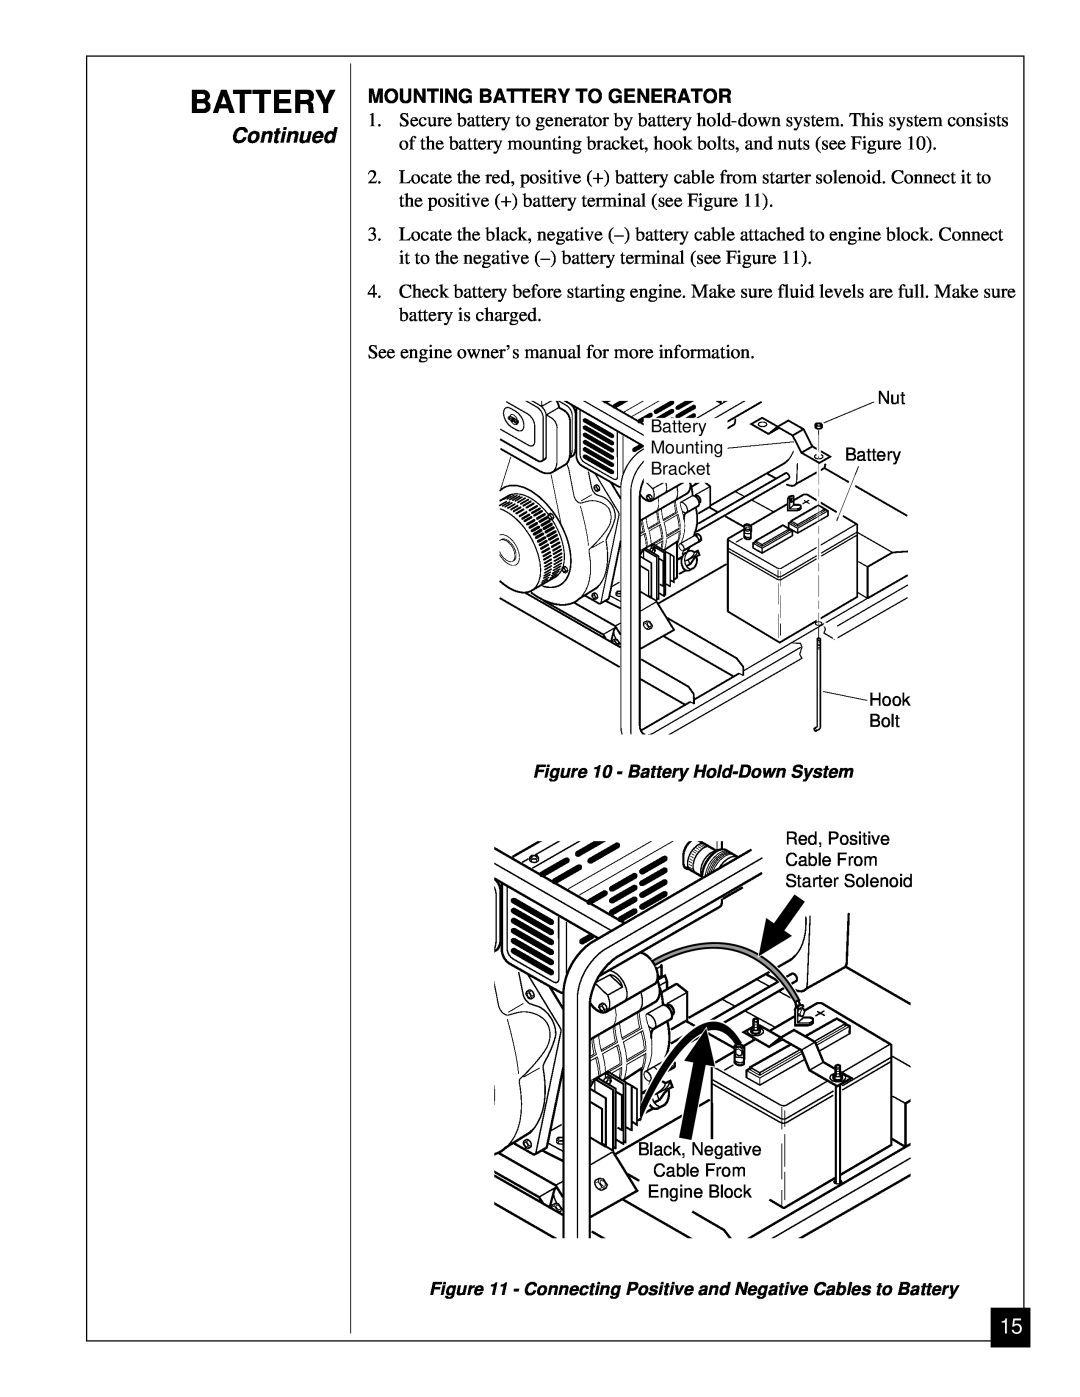 Master Lock MGY5000 installation manual Continued, Mounting Battery To Generator 